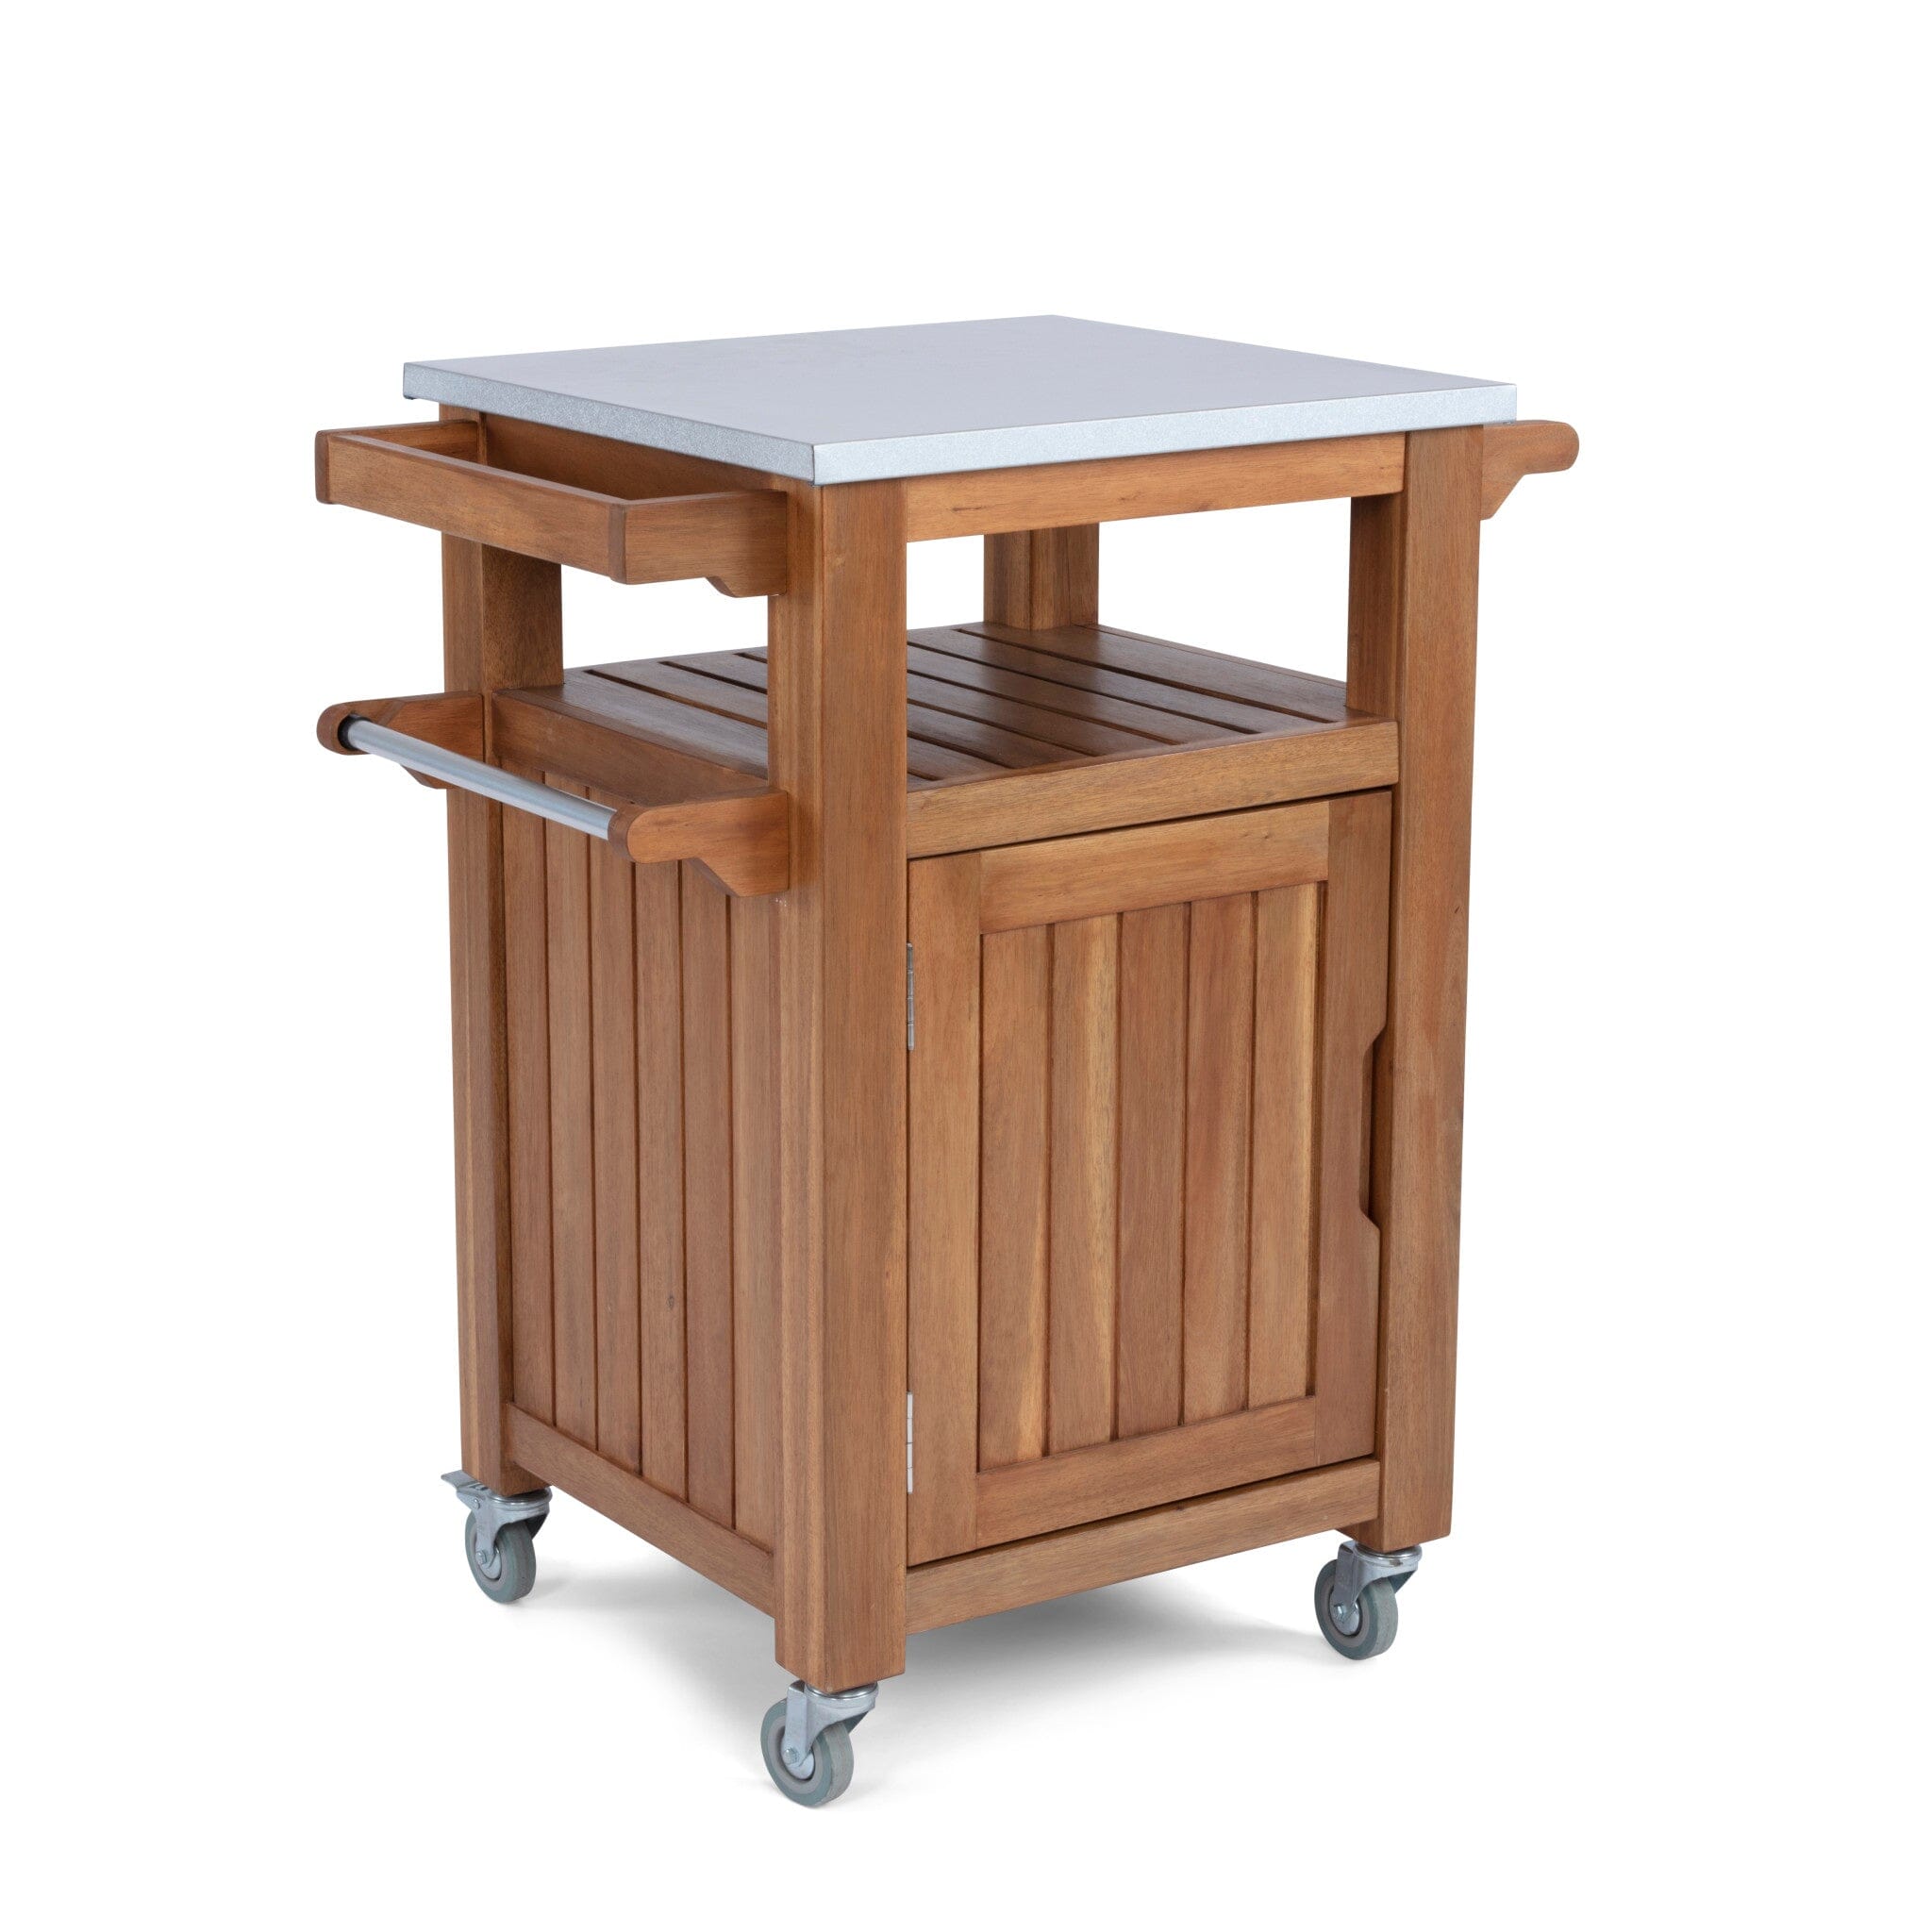 Traditional Outdoor Kitchen Cart By Maho Outdoor Dining Maho